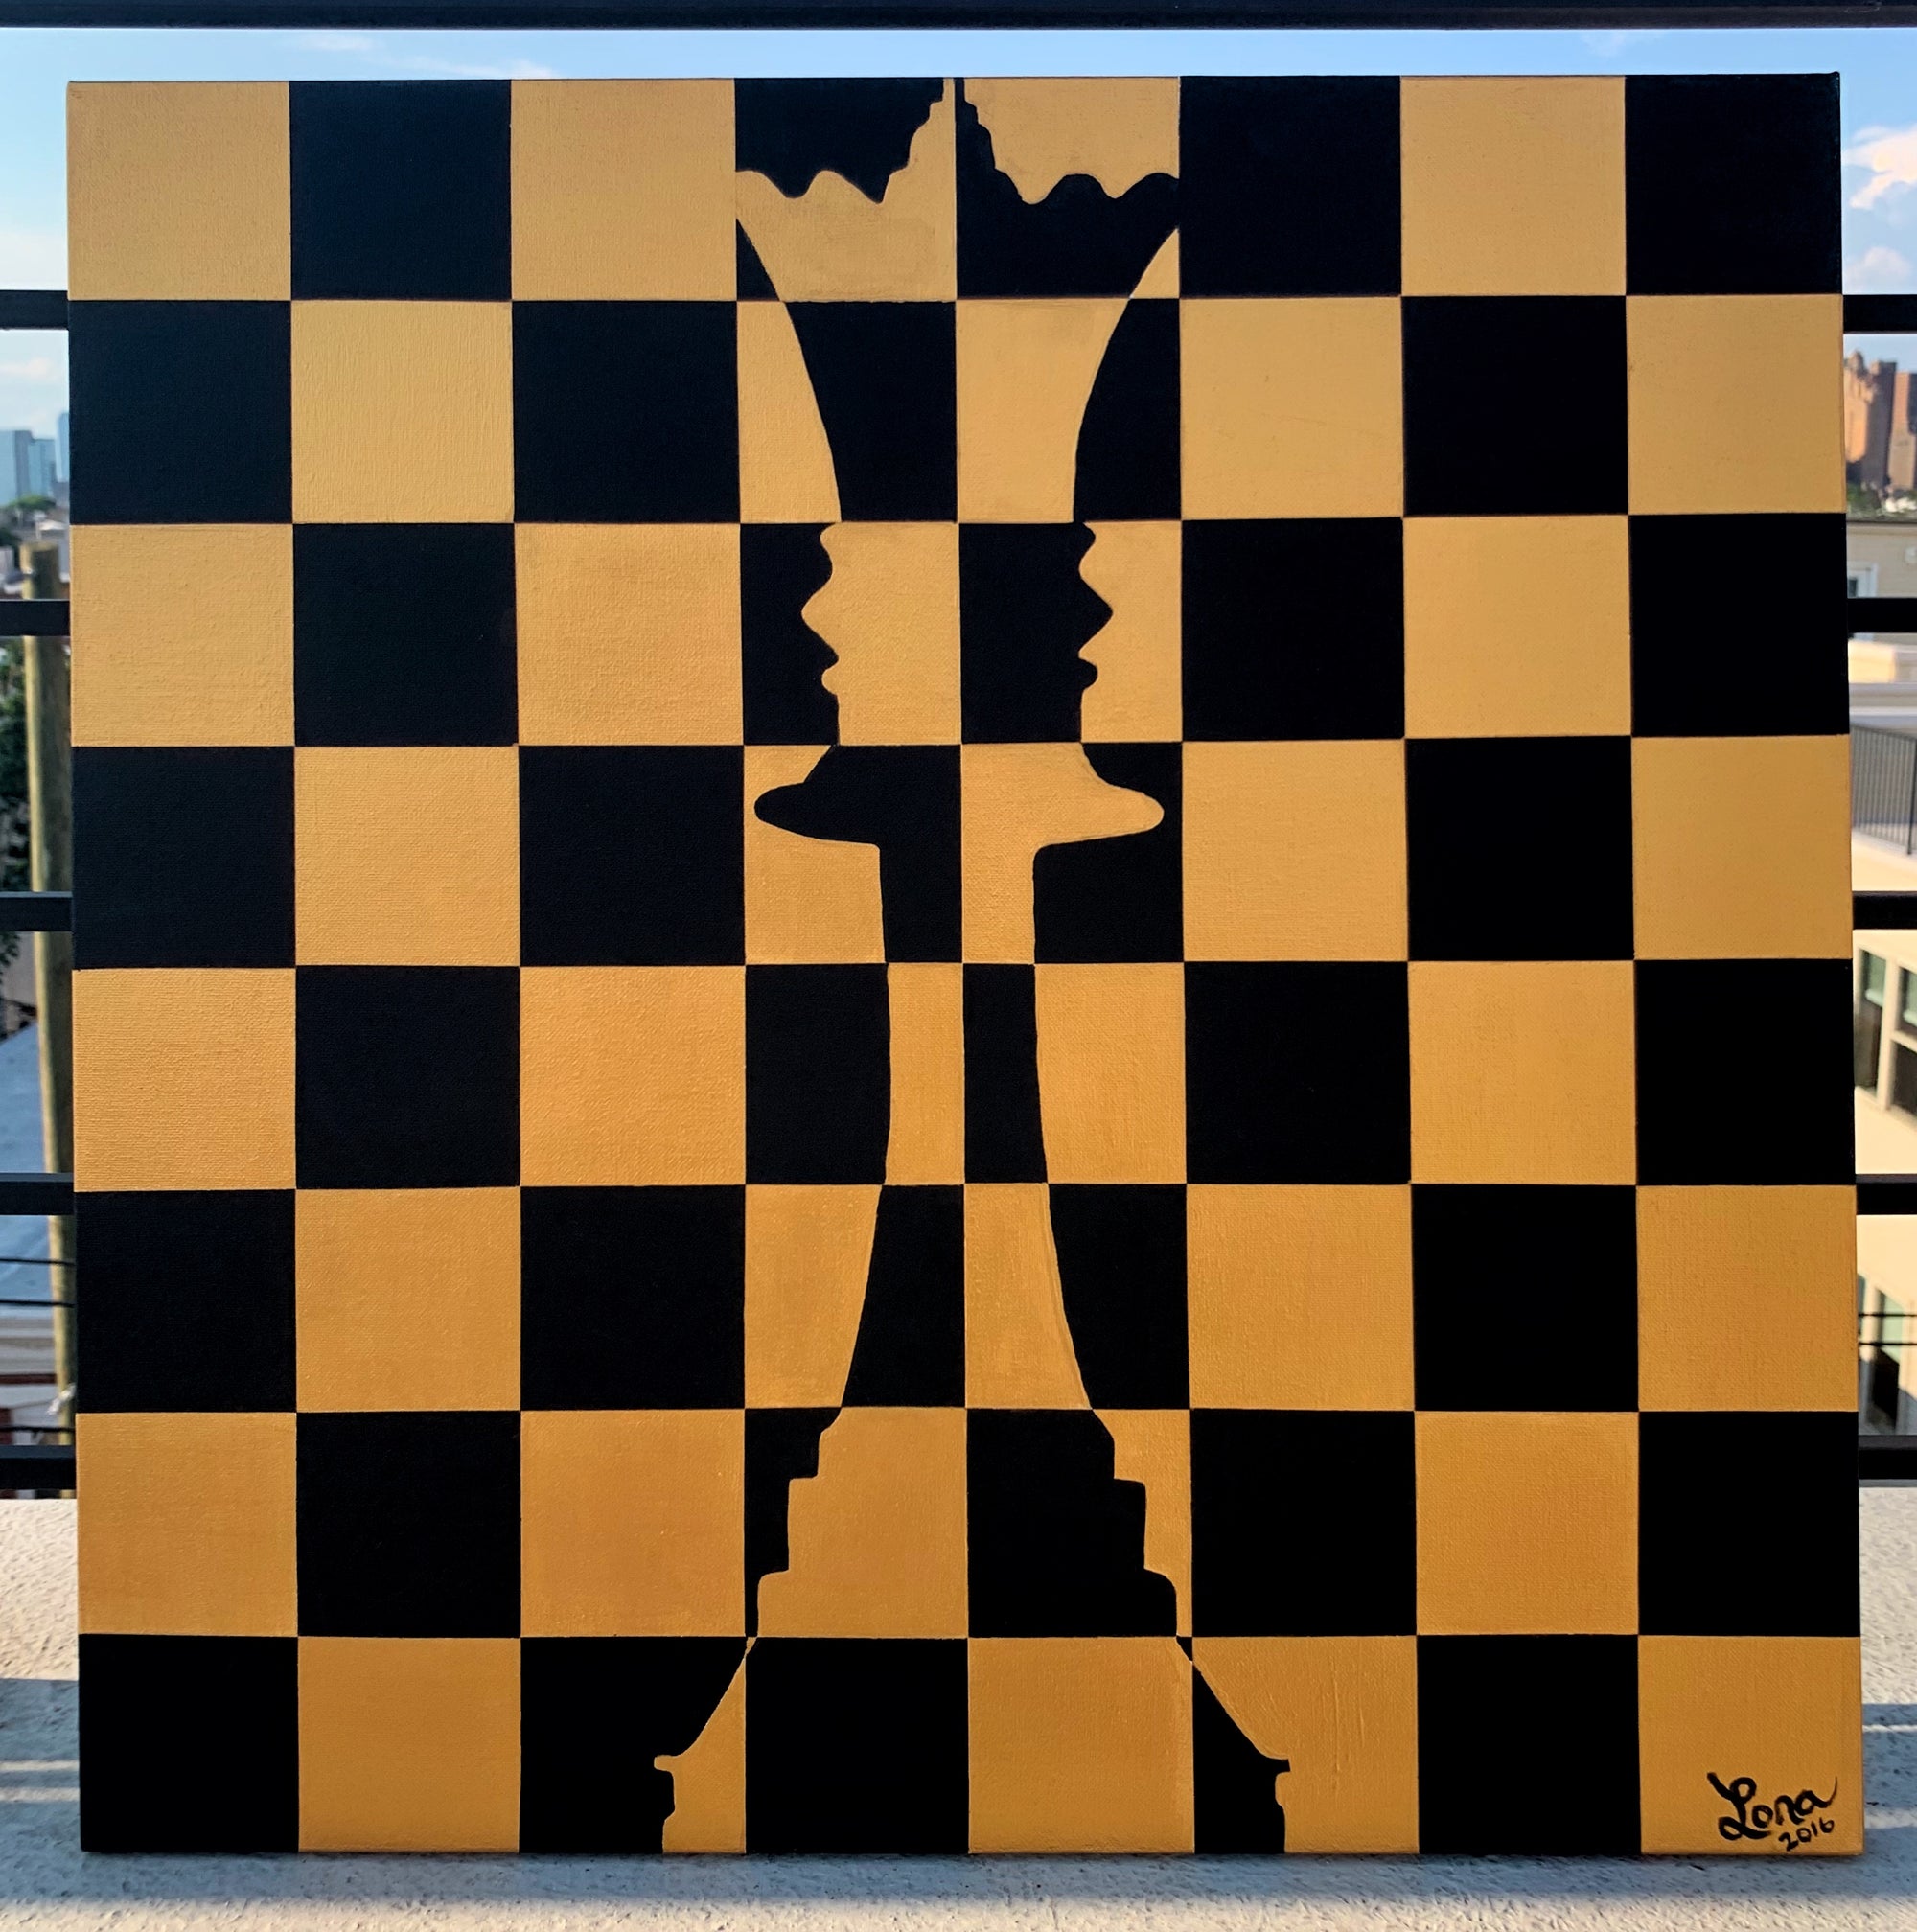 Queen chess piece painted in gold and black